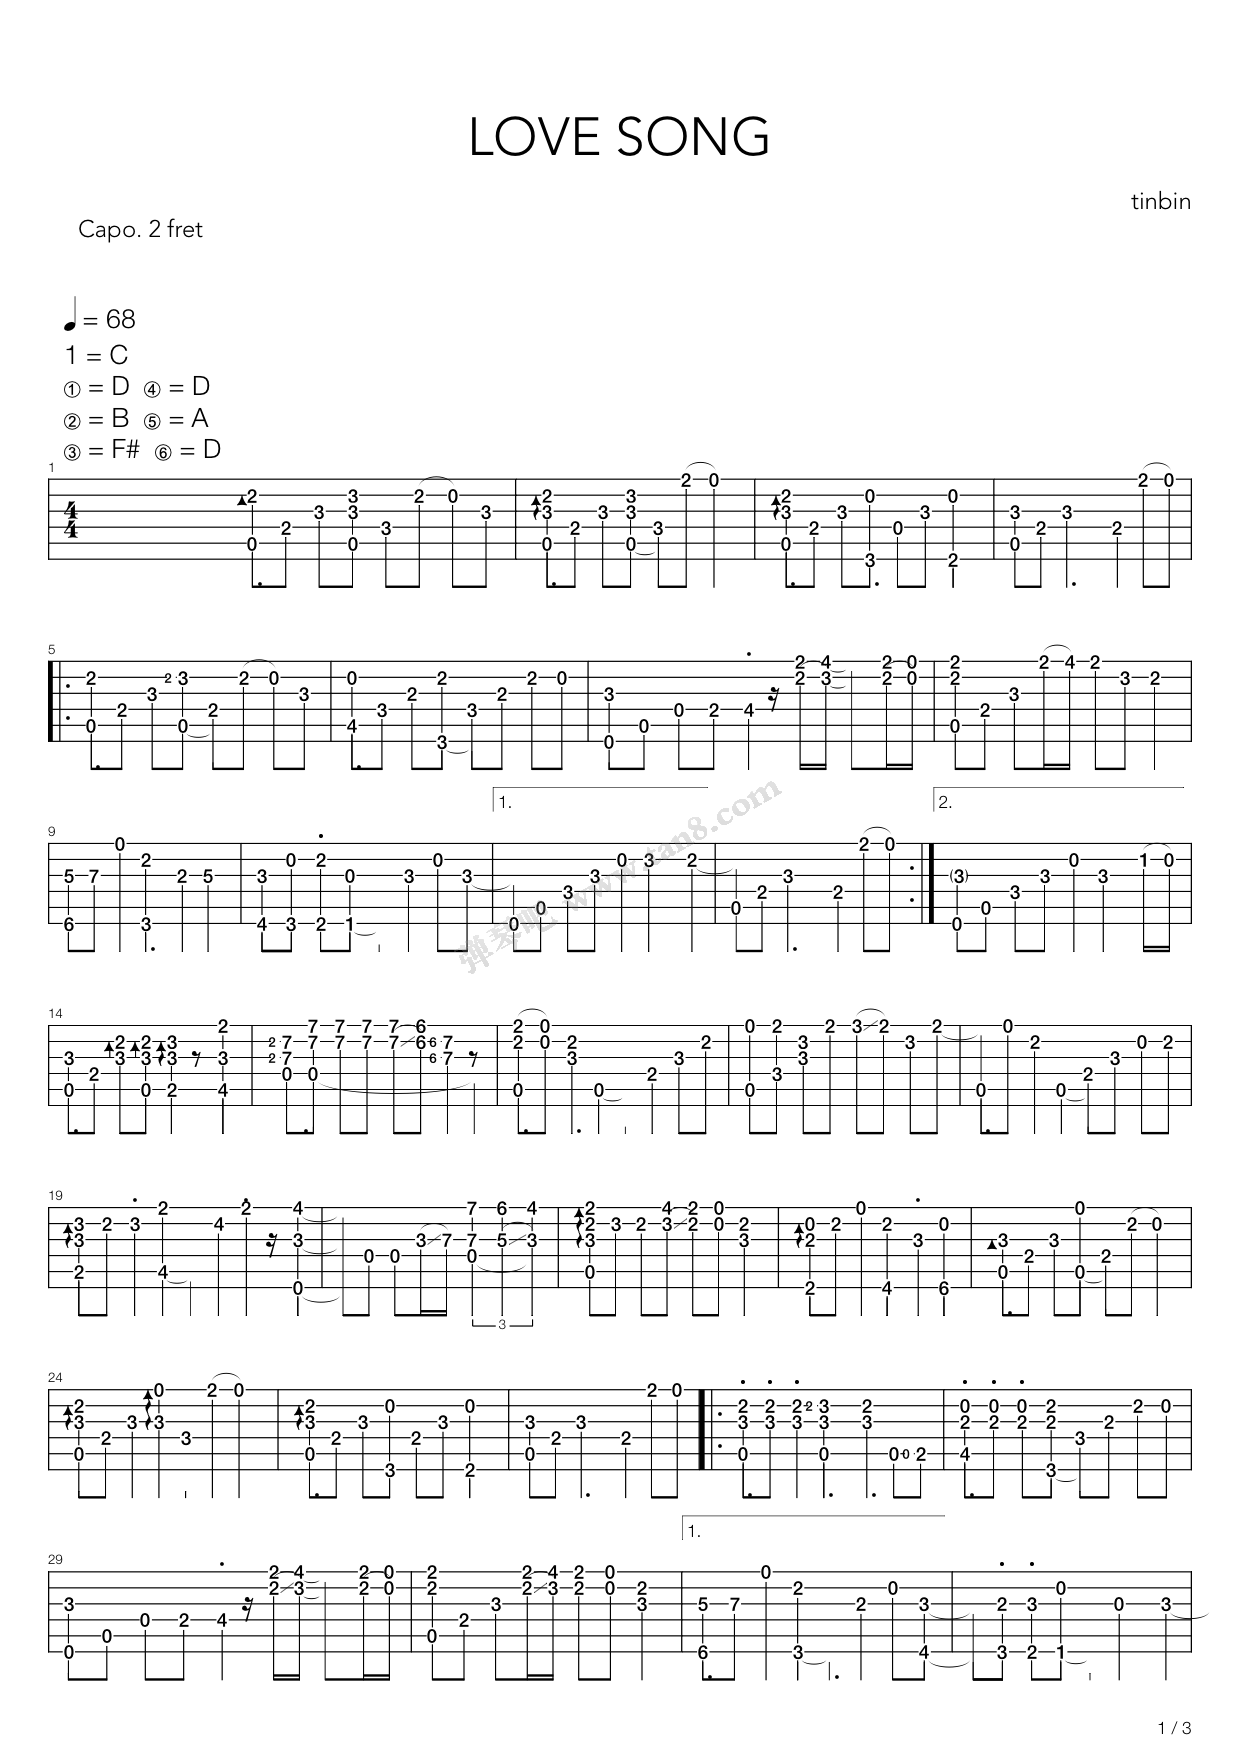 Clapton - Old Love sheet music for guitar (chords) [PDF]